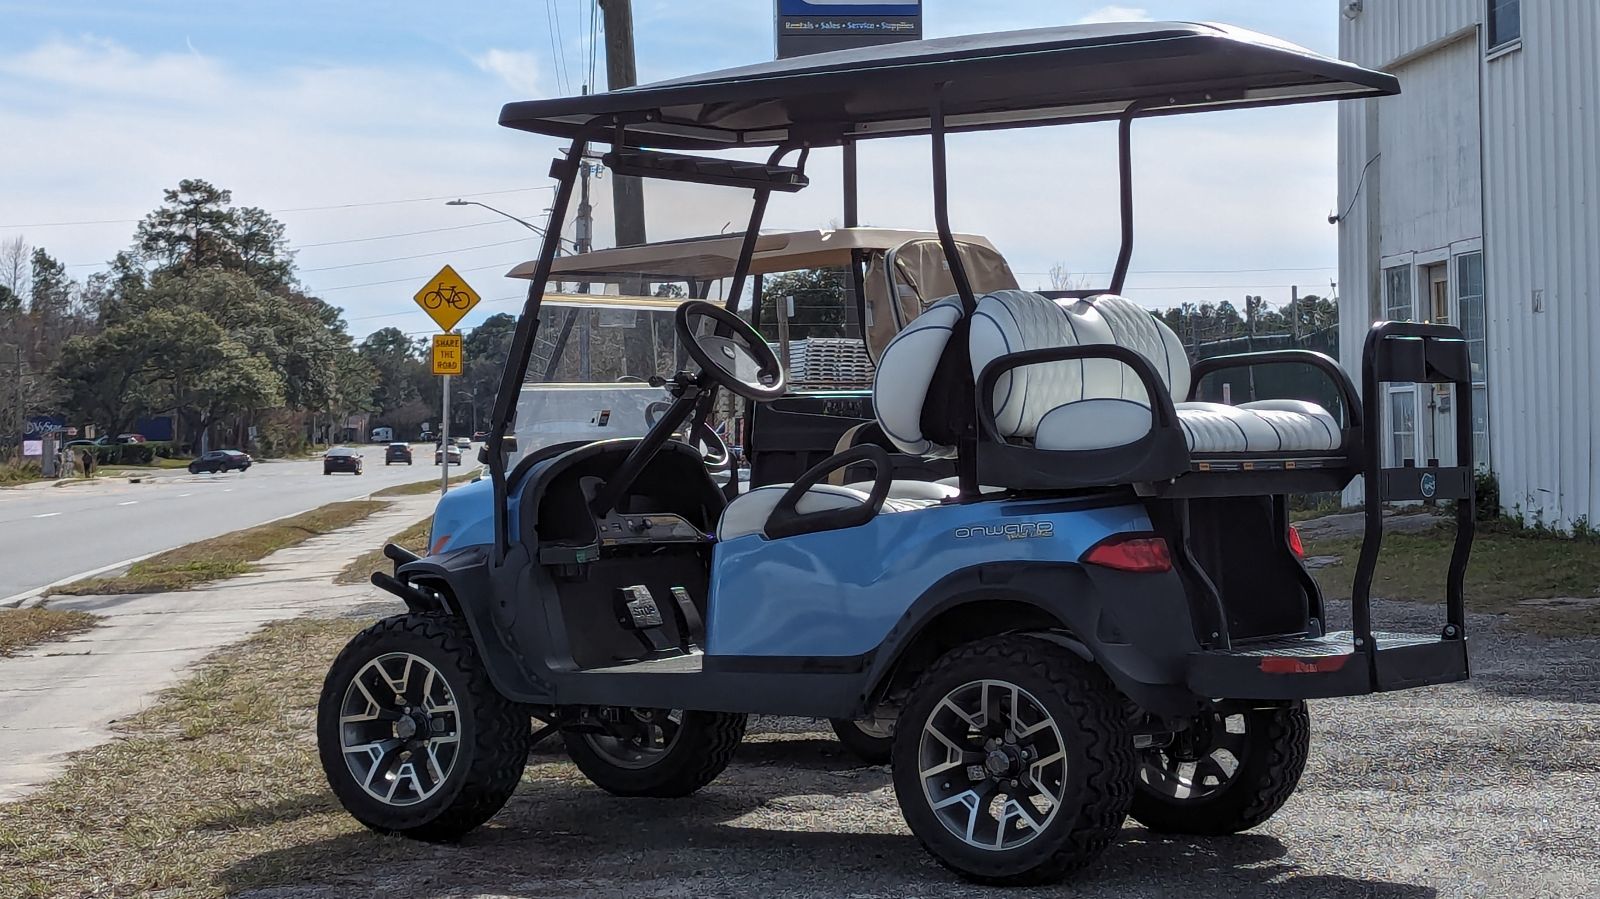 Featured image for “St. Johns County adopts state law for youths driving golf carts”